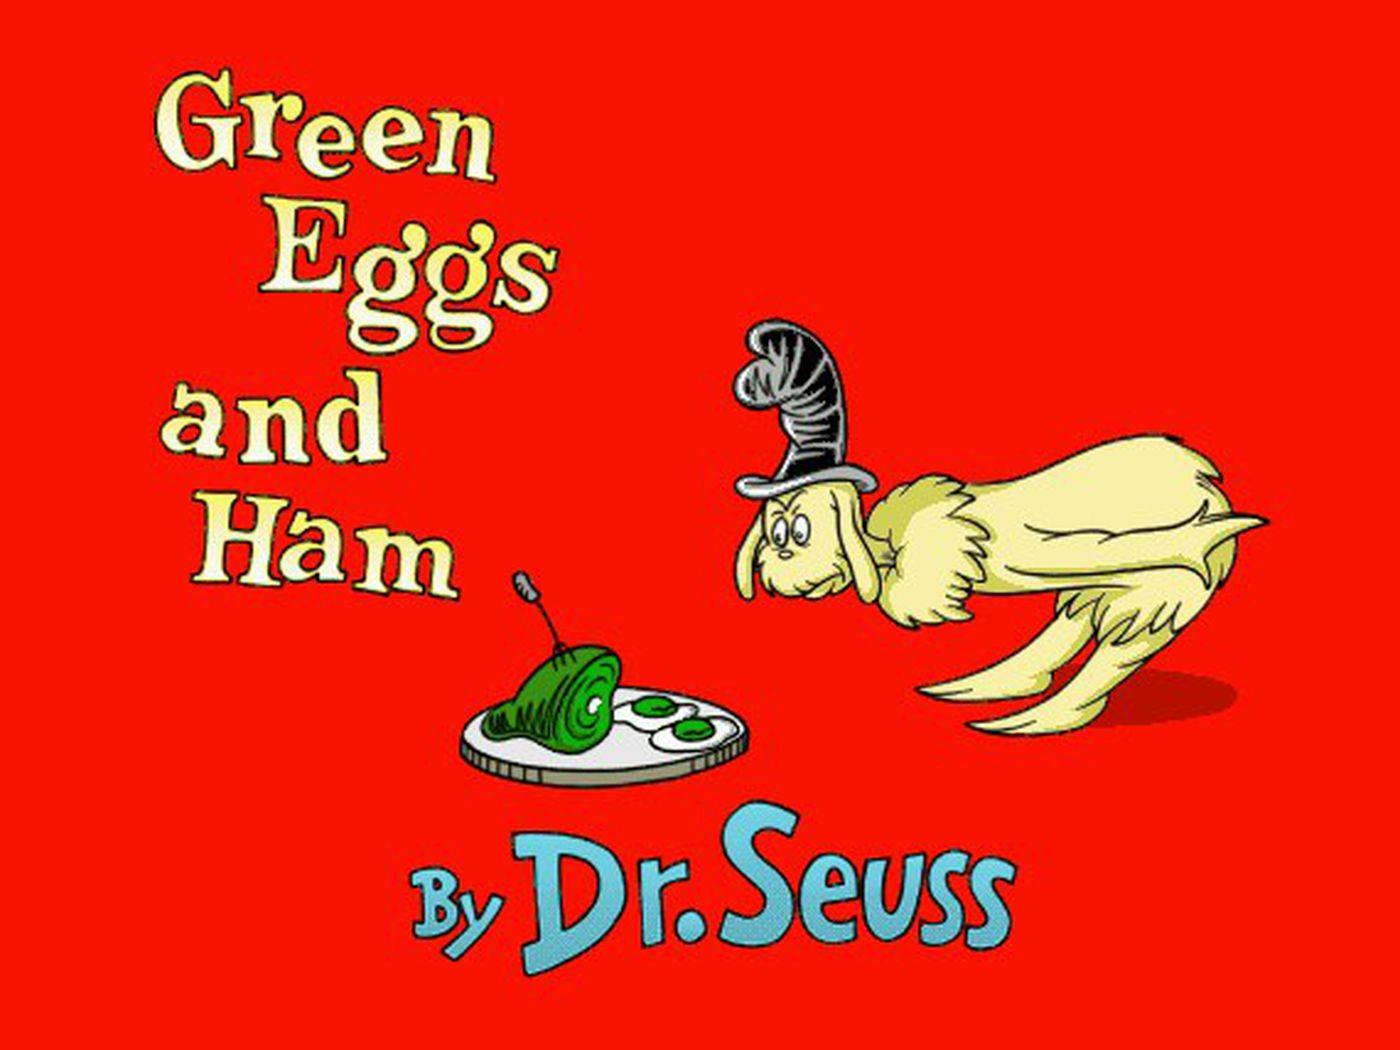 Netflix is adapting Dr. Seuss, Green Eggs and Ham it will